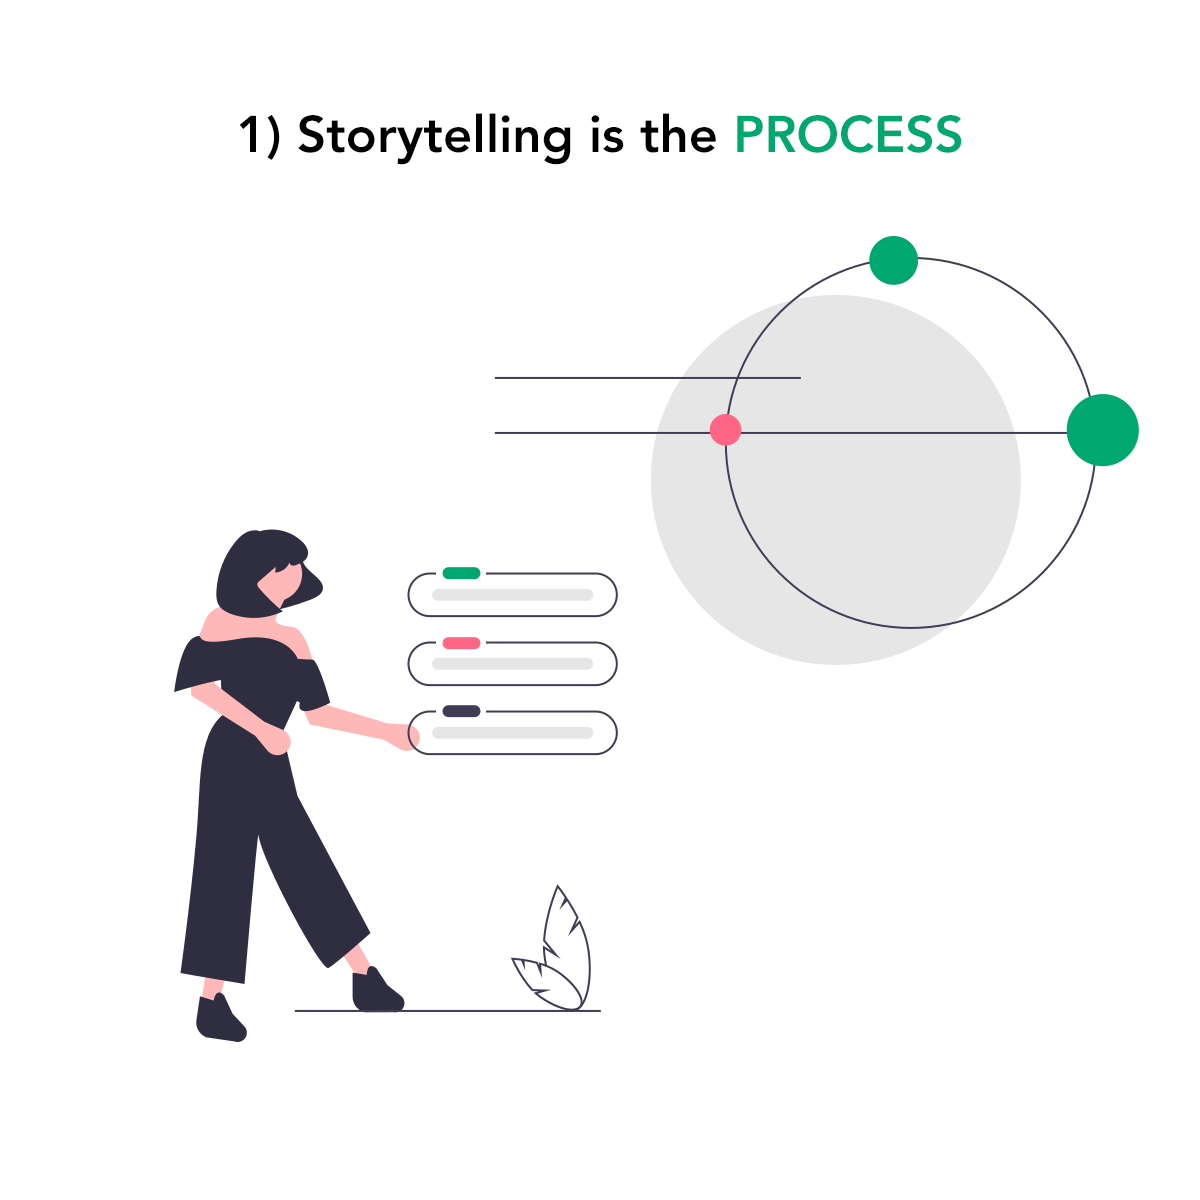 storytelling is the process